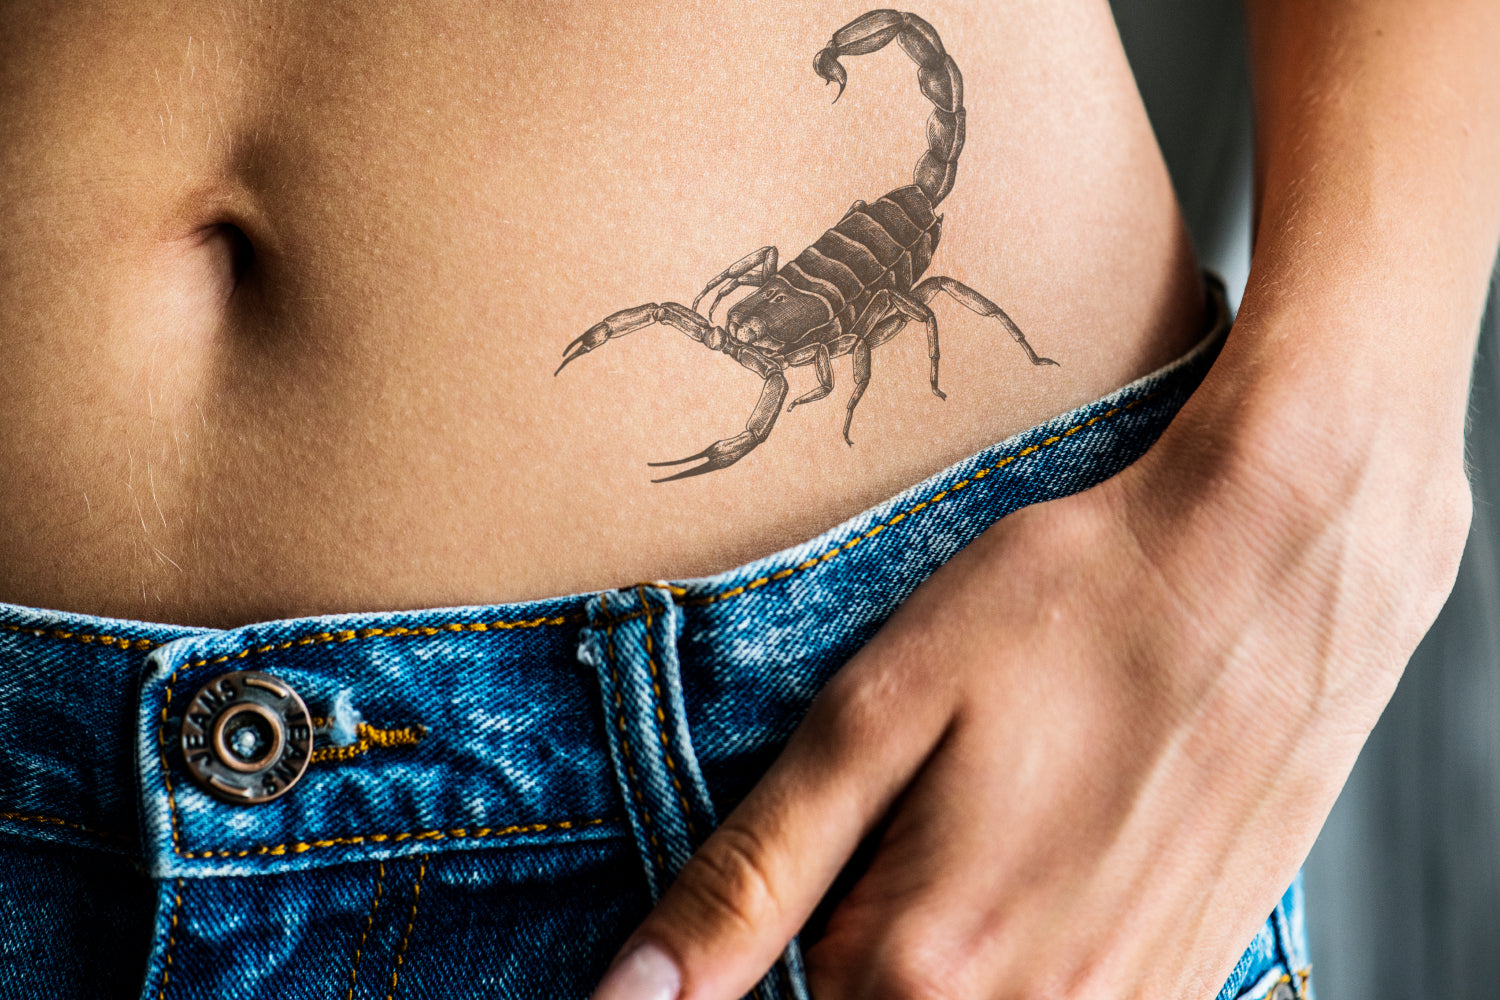 79 Awesome Aries Tattoos For Women To Amaze Your Friends